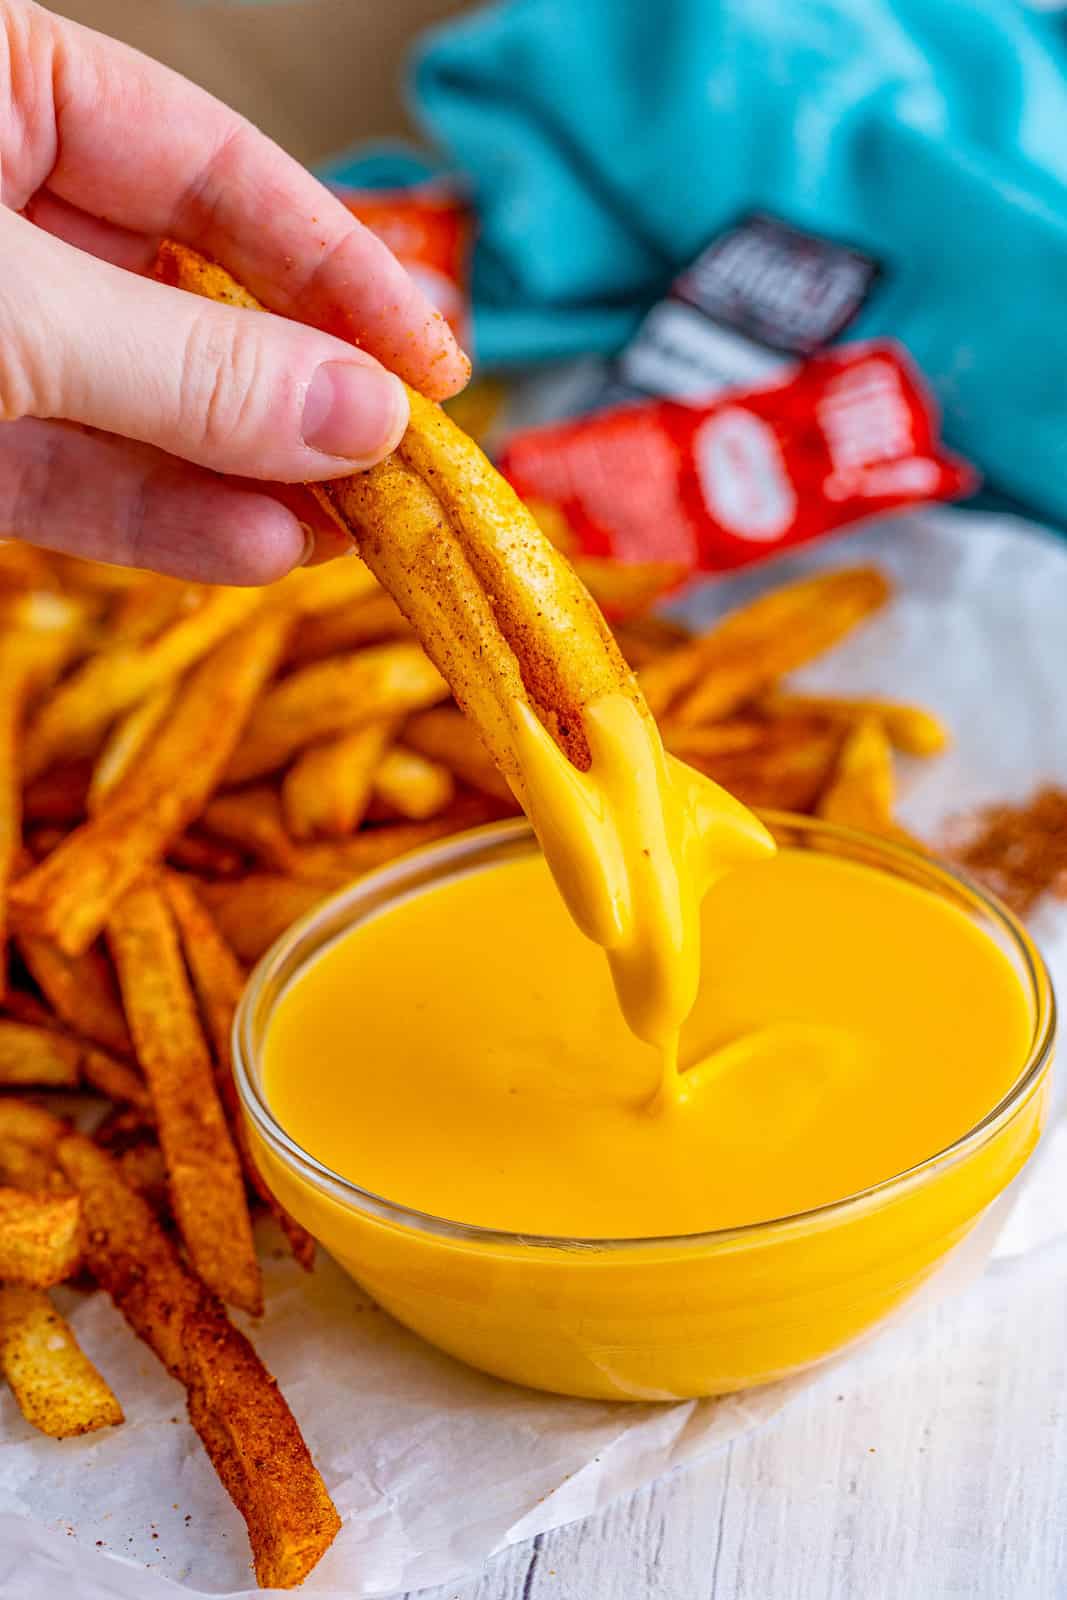 Hand dipping Taco Bell Nacho Fries into cheese sauce.